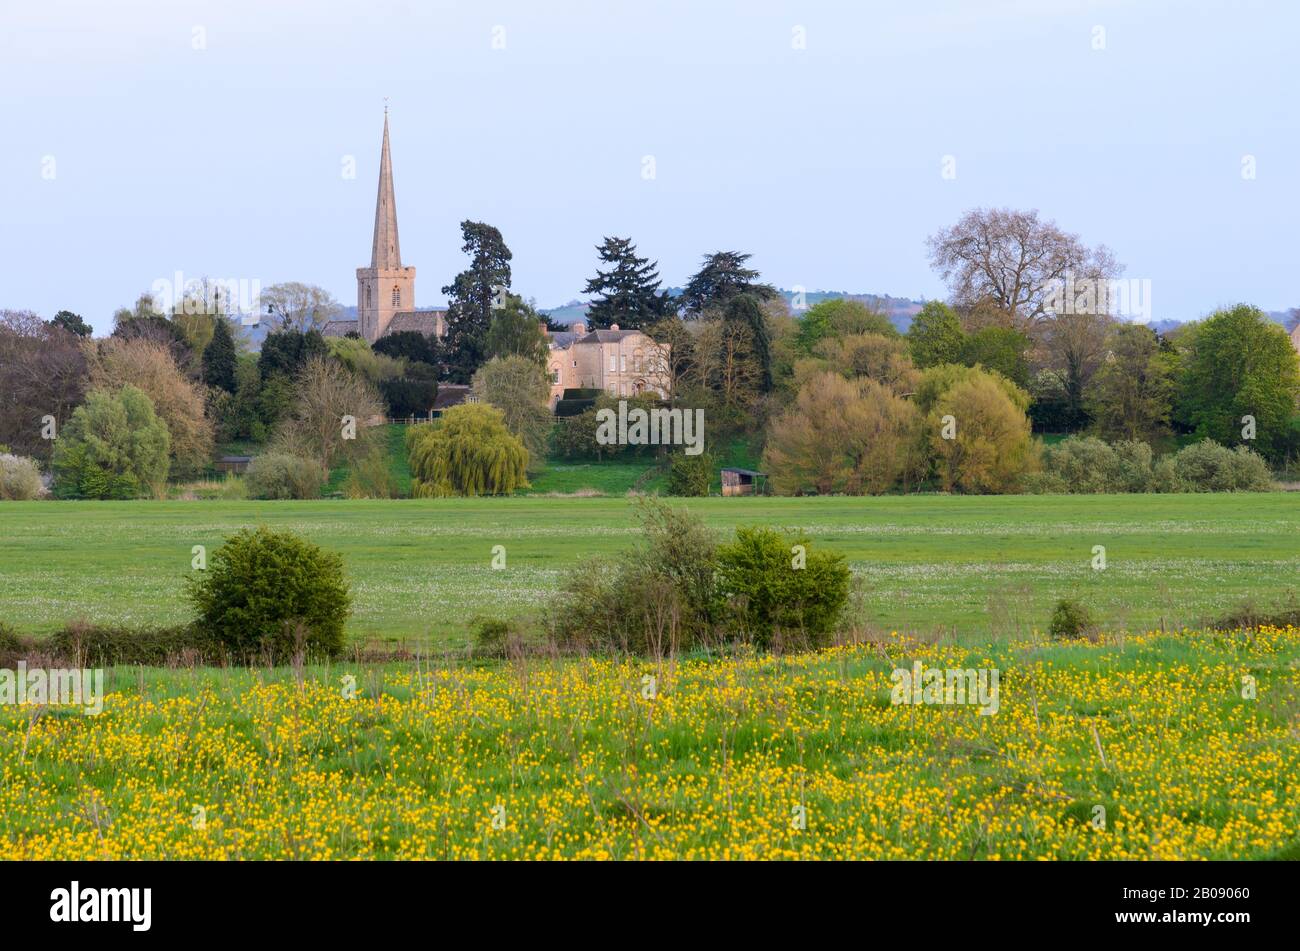 St Giles Church and the Tithe Barn in Bredon, Worcestershire, England, UK Stock Photo